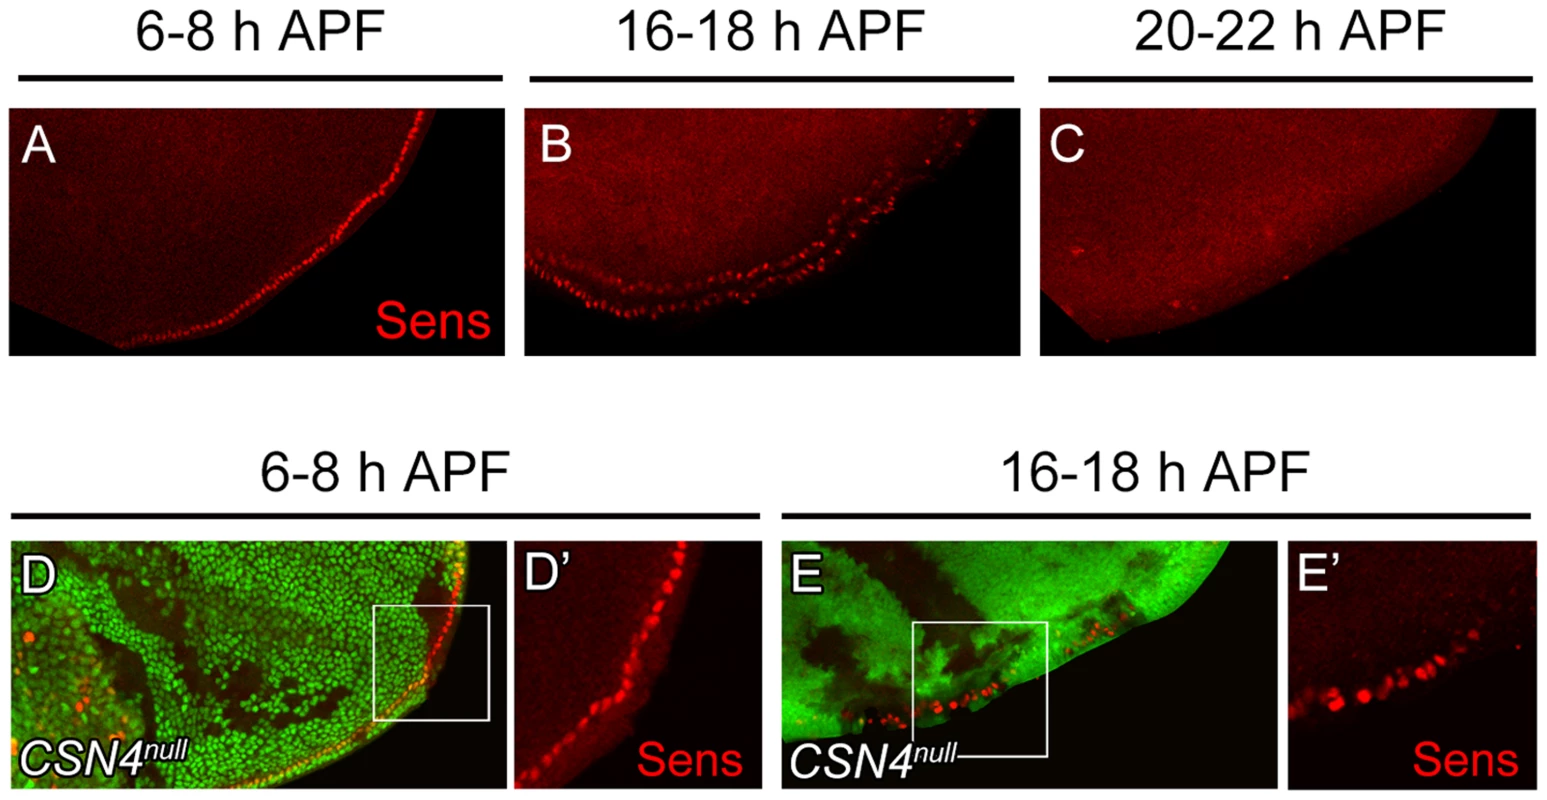 Temporal regulation of Sens expression by CSN4.